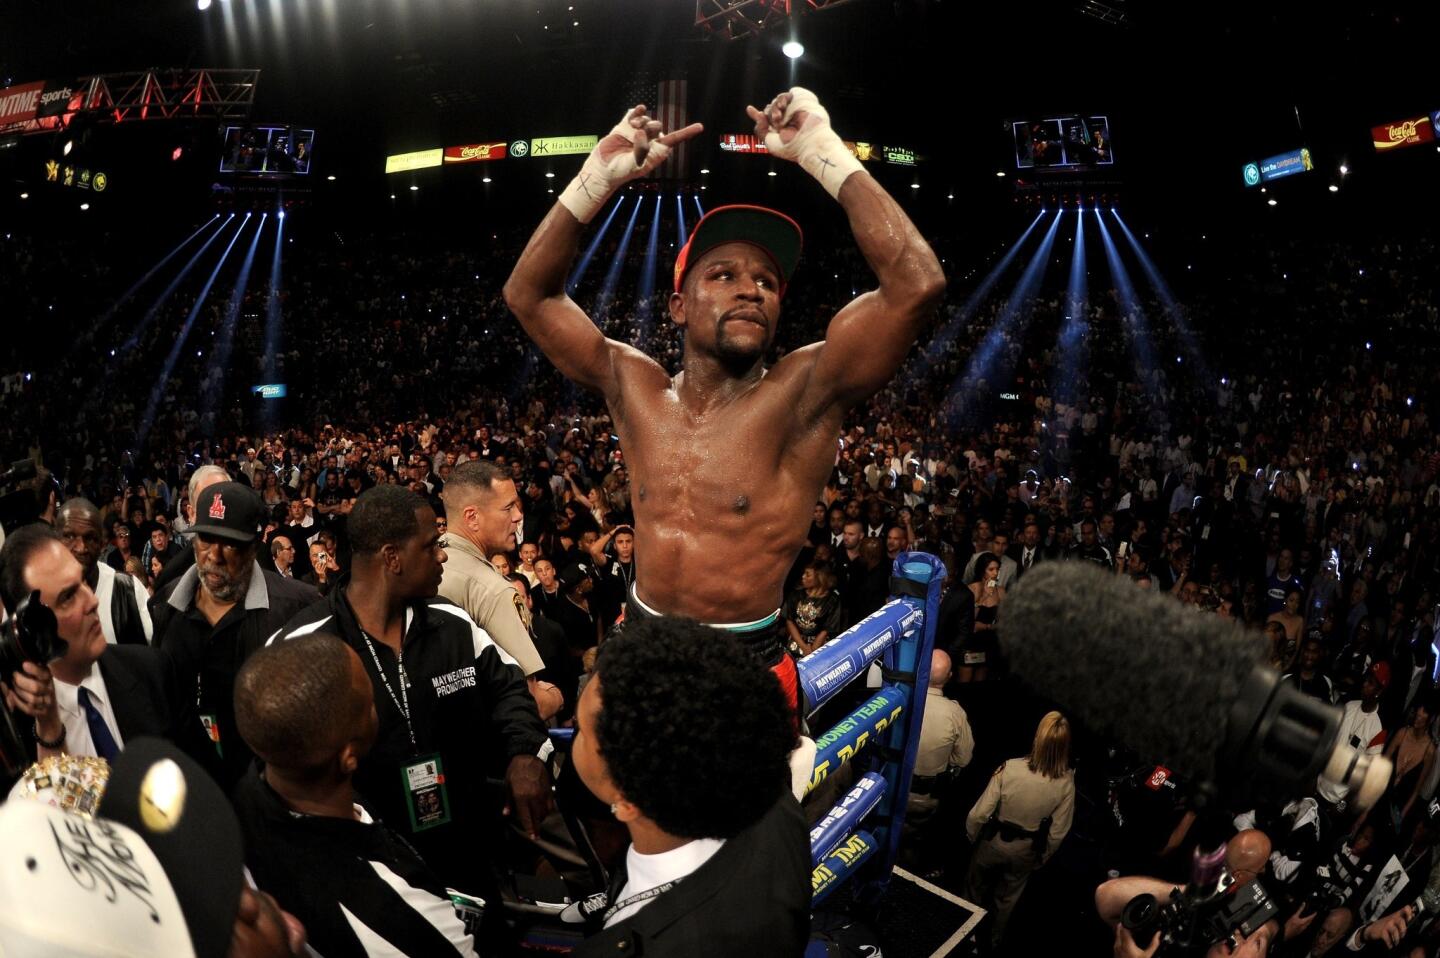 Floyd Mayweather Jr. celebrates his victory by majority decision over Marcos Maidana in a welterweight unification title bout at the MGM Garden Arena in Las Vegas.